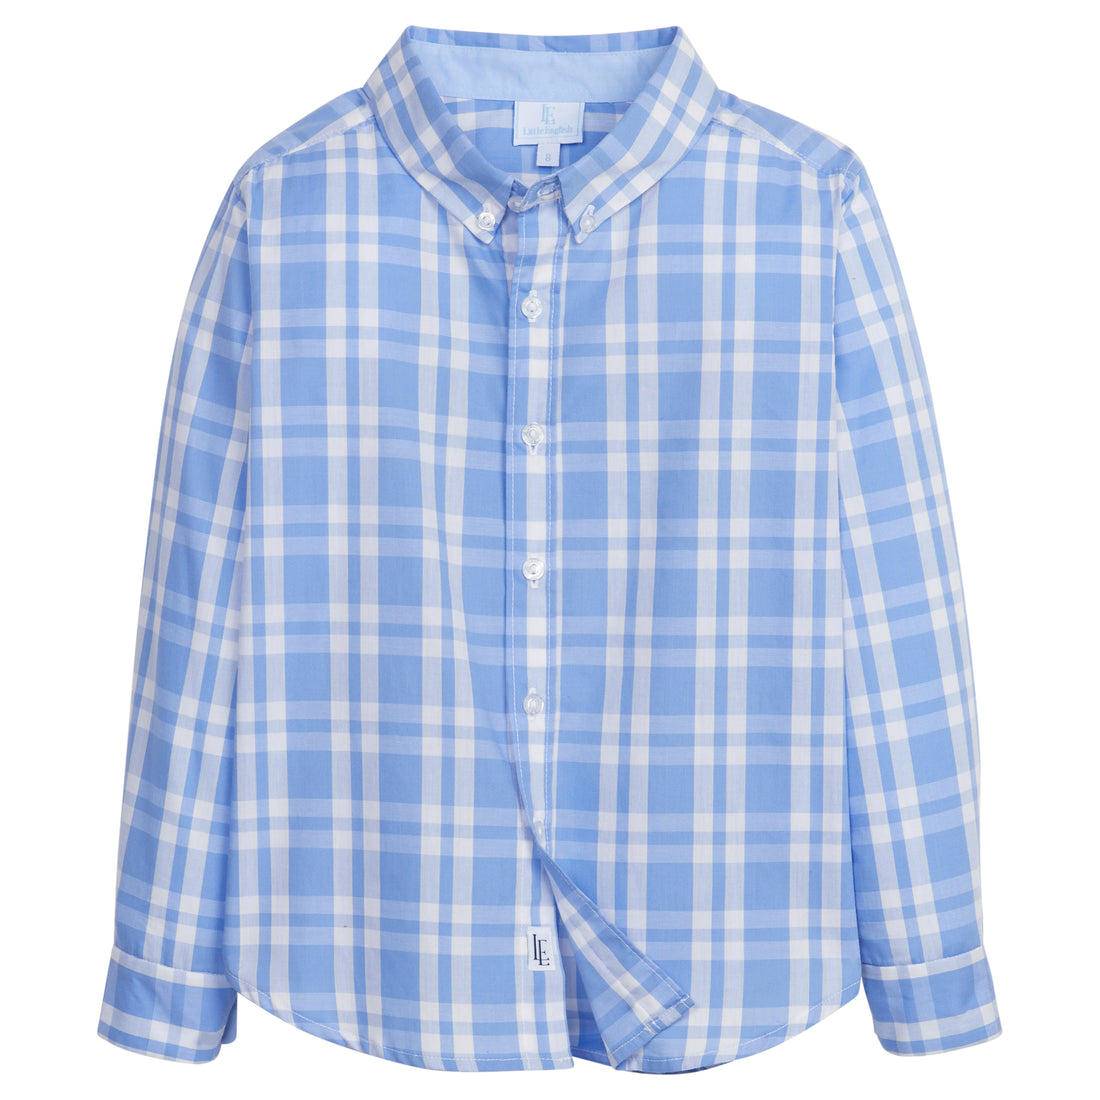 Little English tradition button down shirt for boys, blue and white plaid shirt for spring